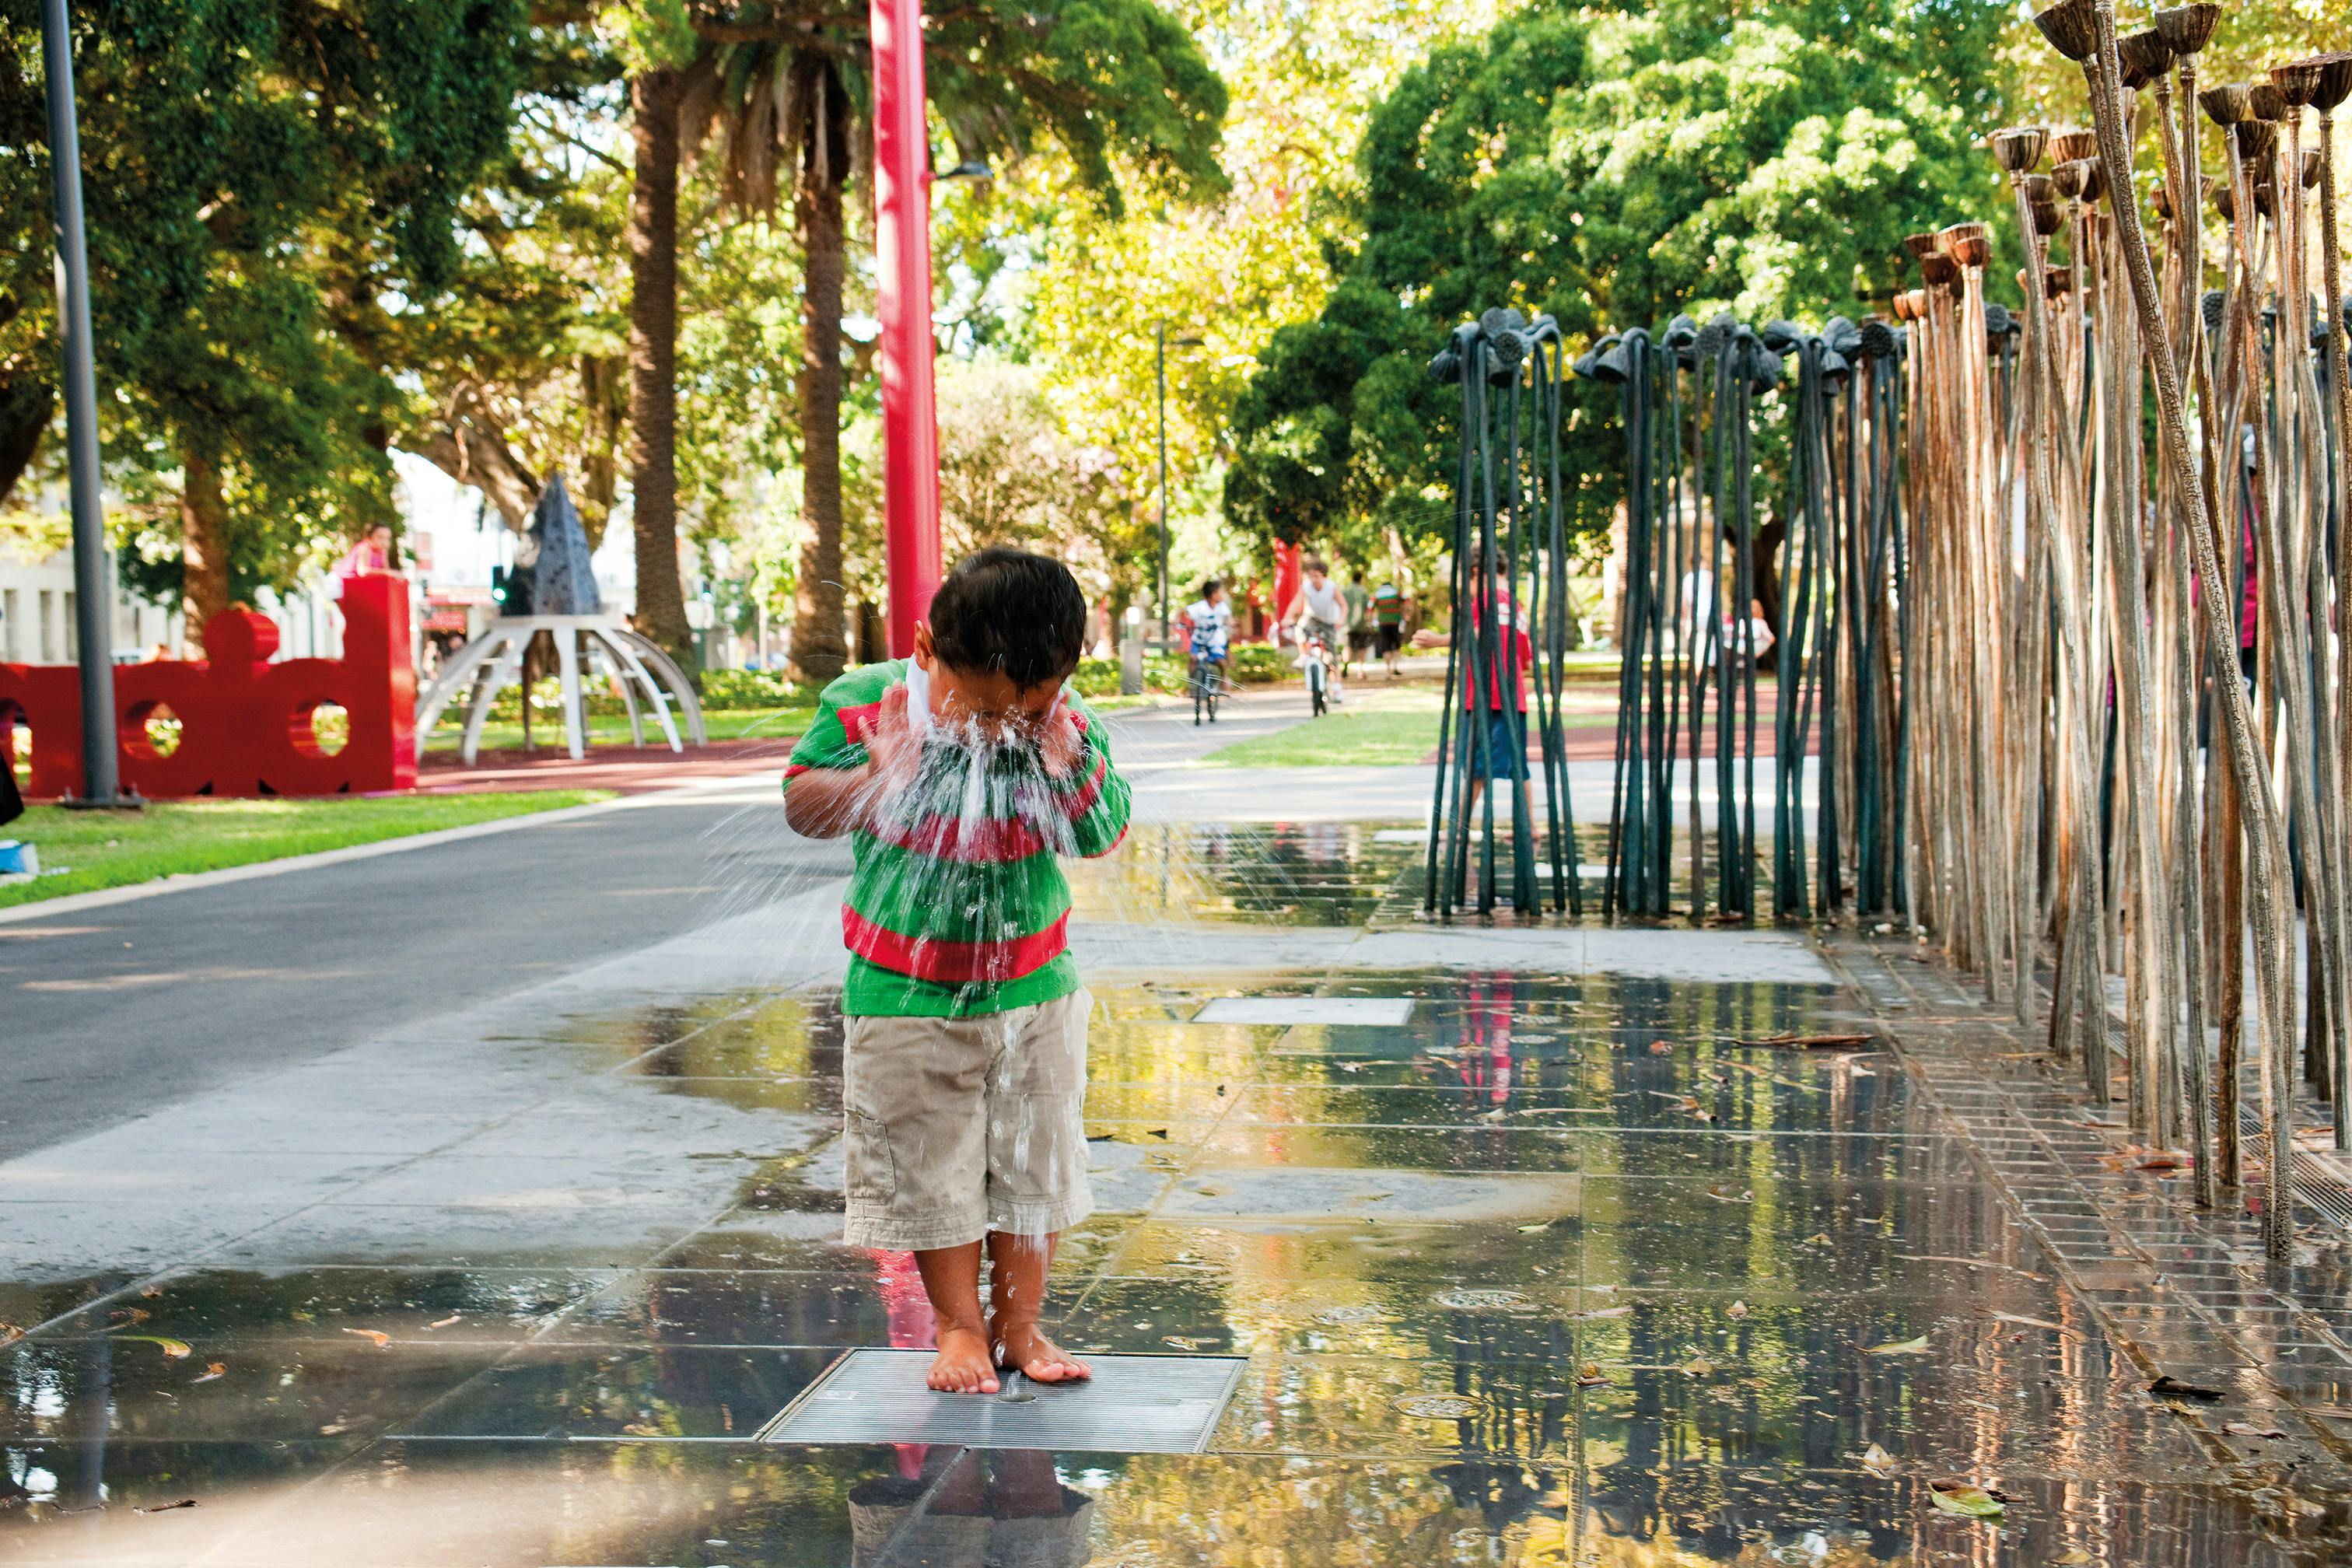 The healing and rebirth of Redfern Park